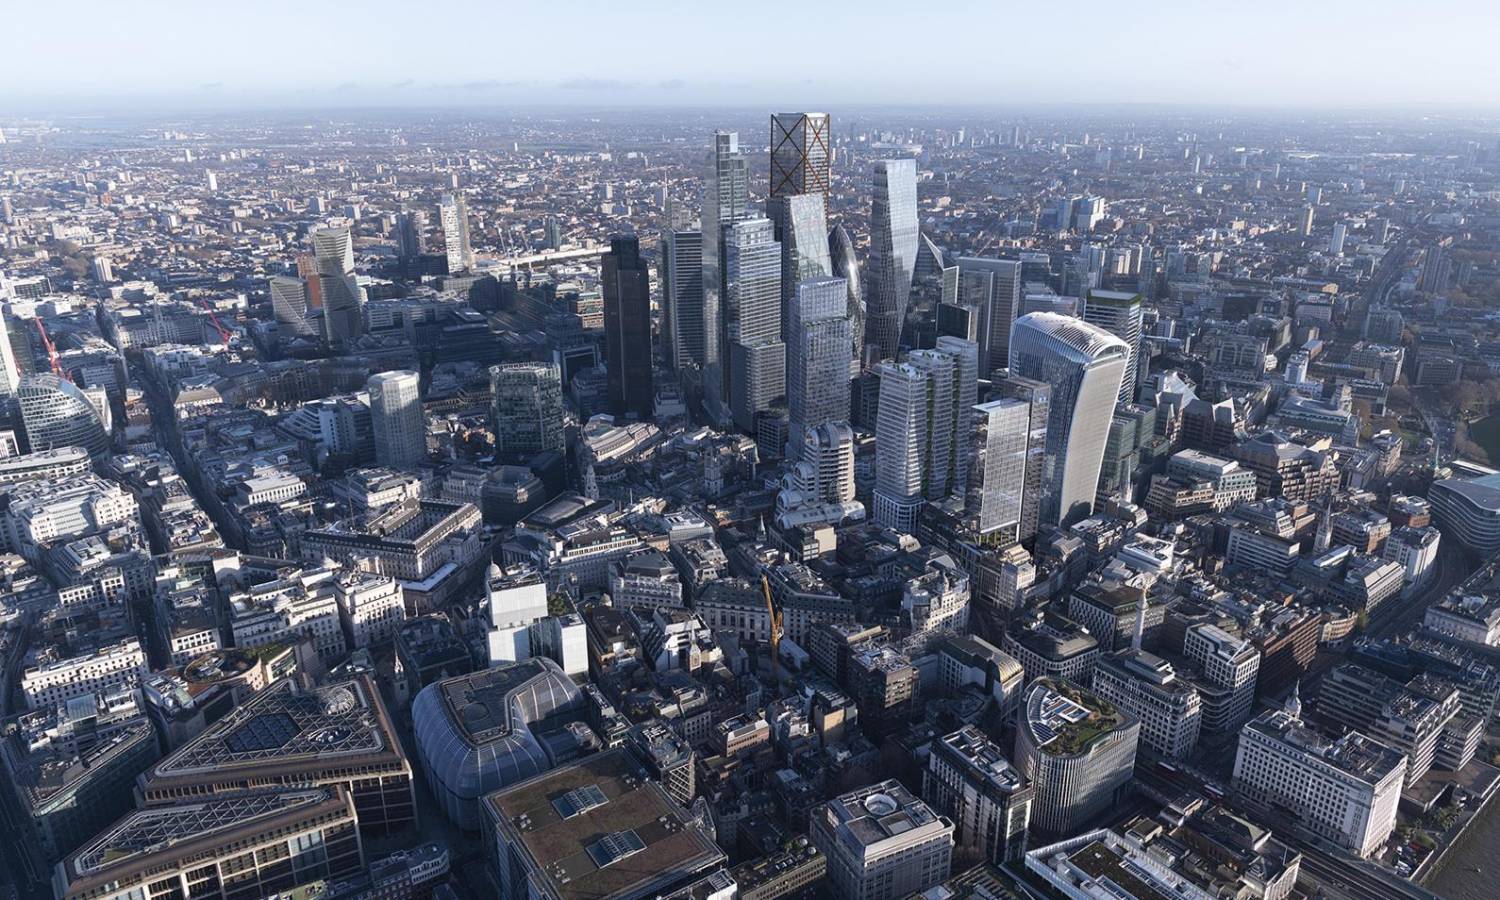 London could fit 400,000 new homes on brownfield sites